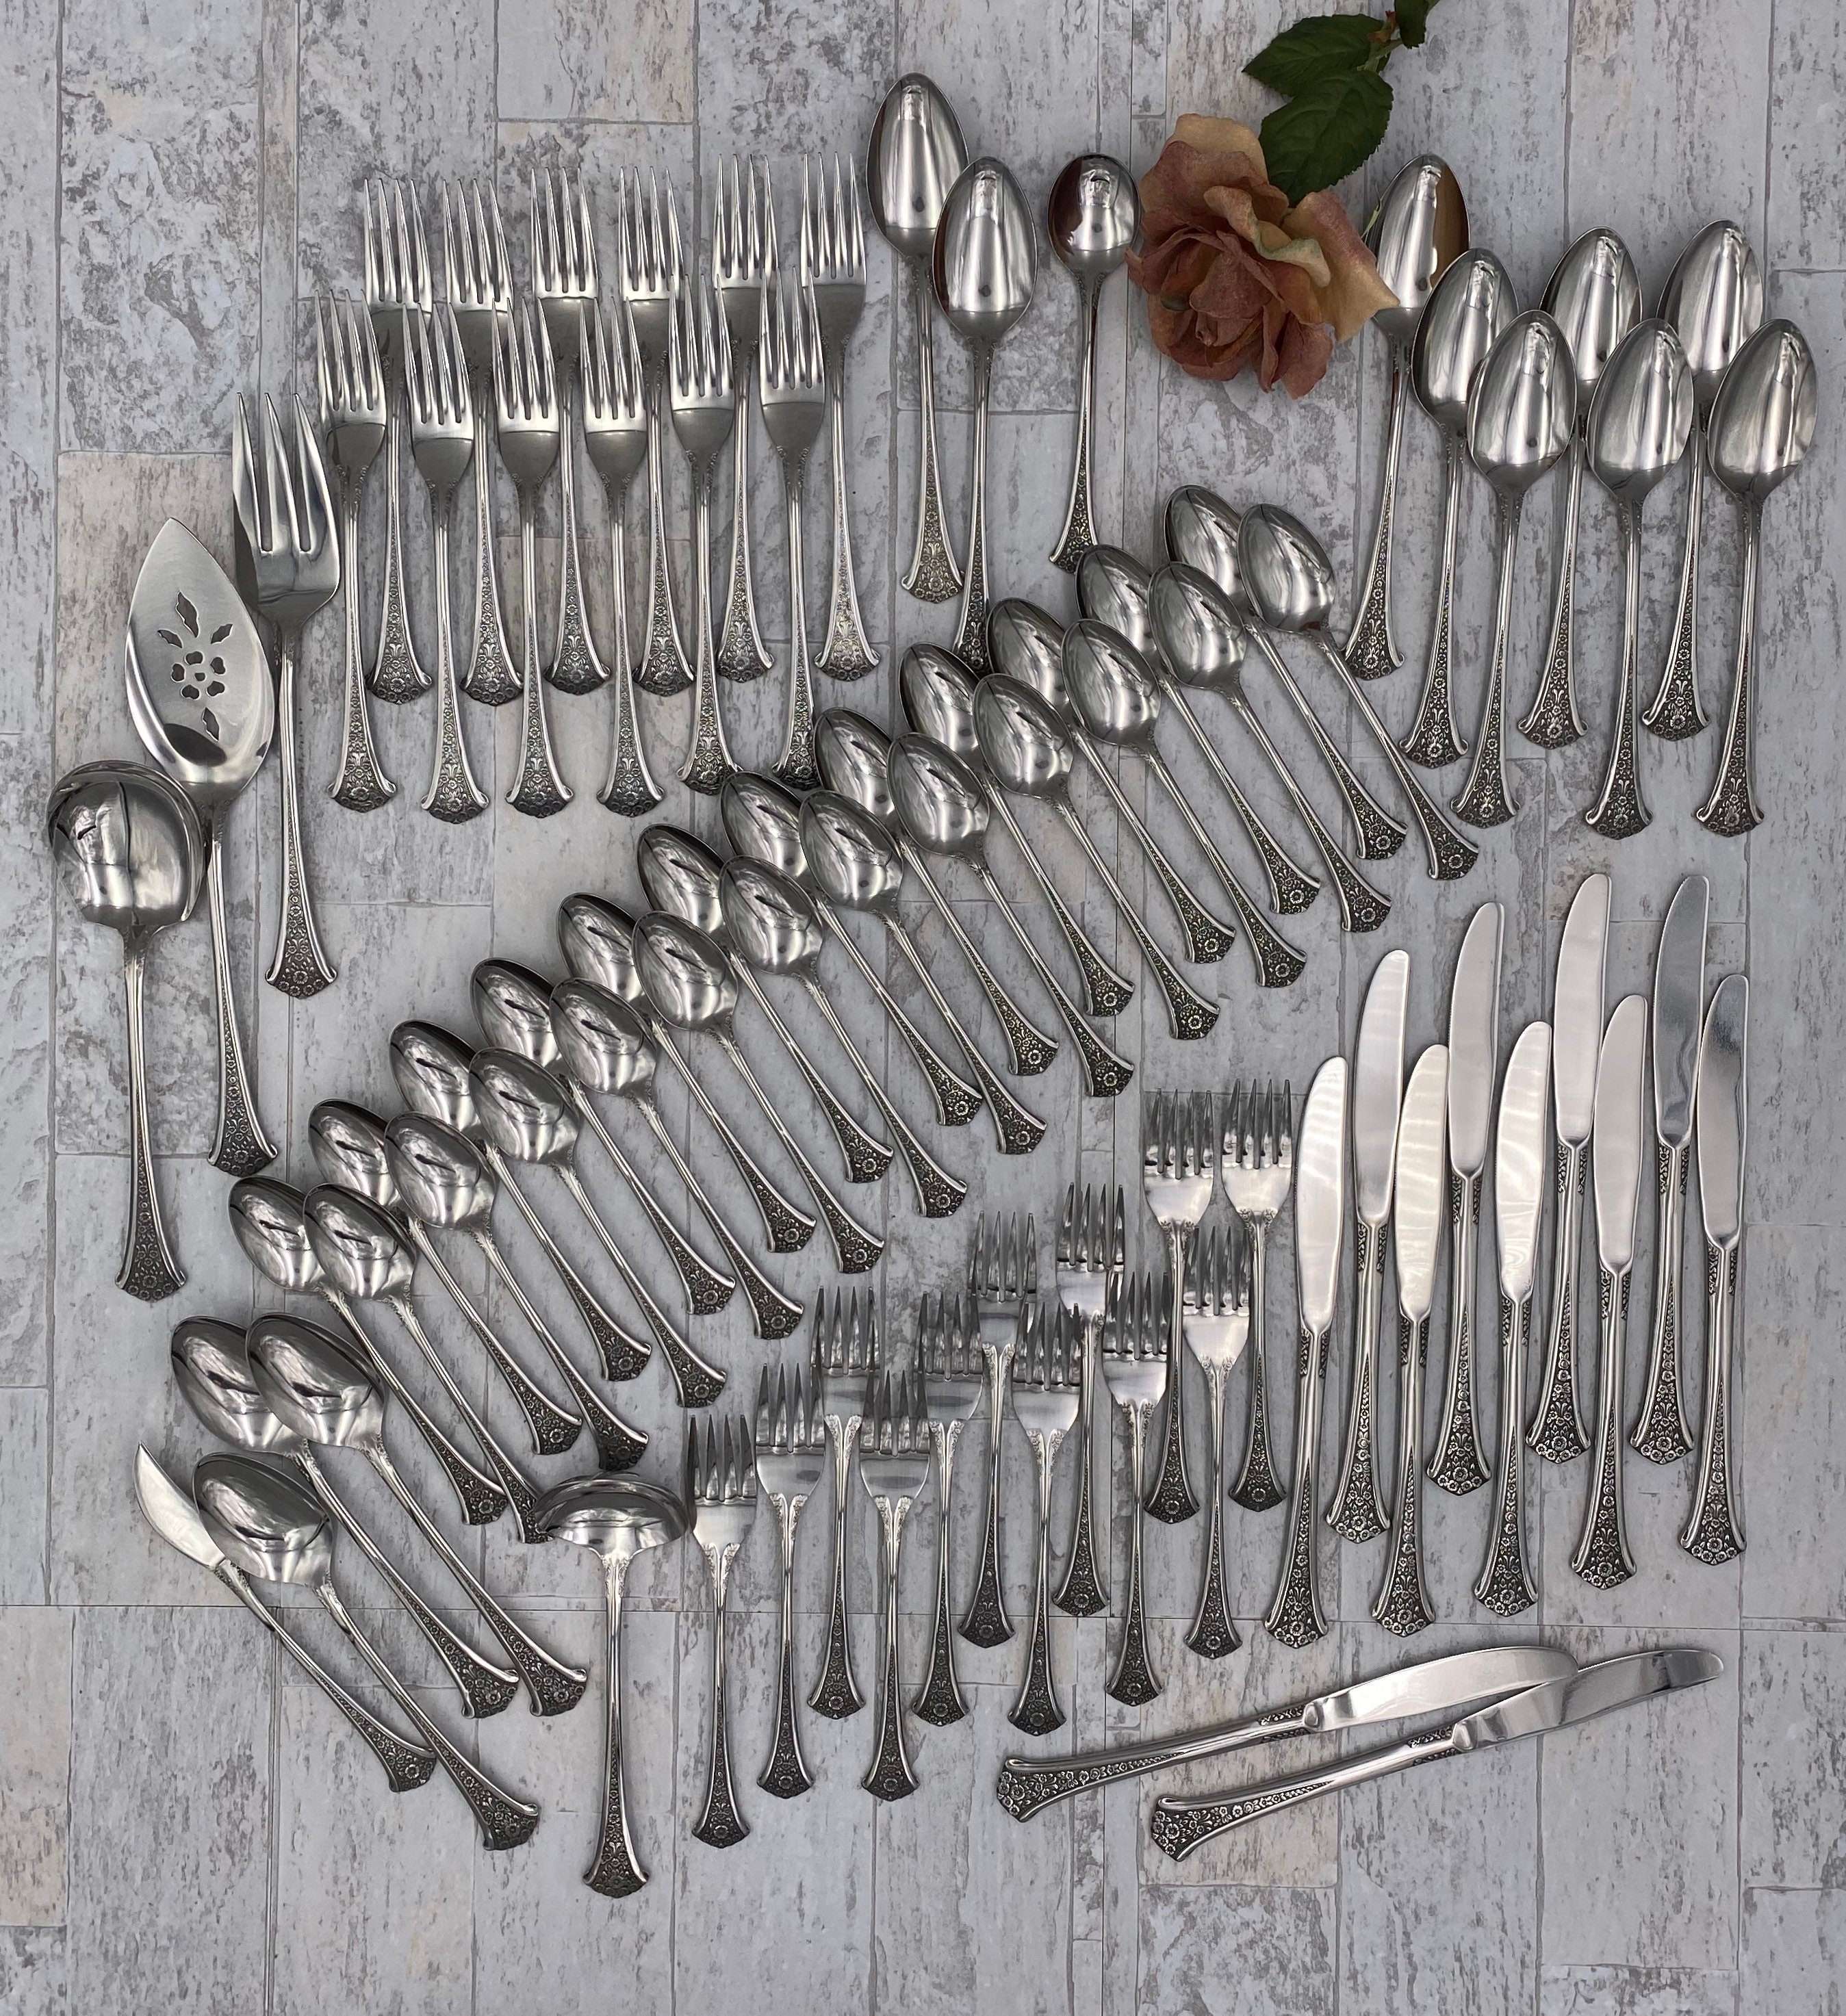 Vintage Tradition Stainless USA Misty Isle set of 12 Tablespoons Flatware